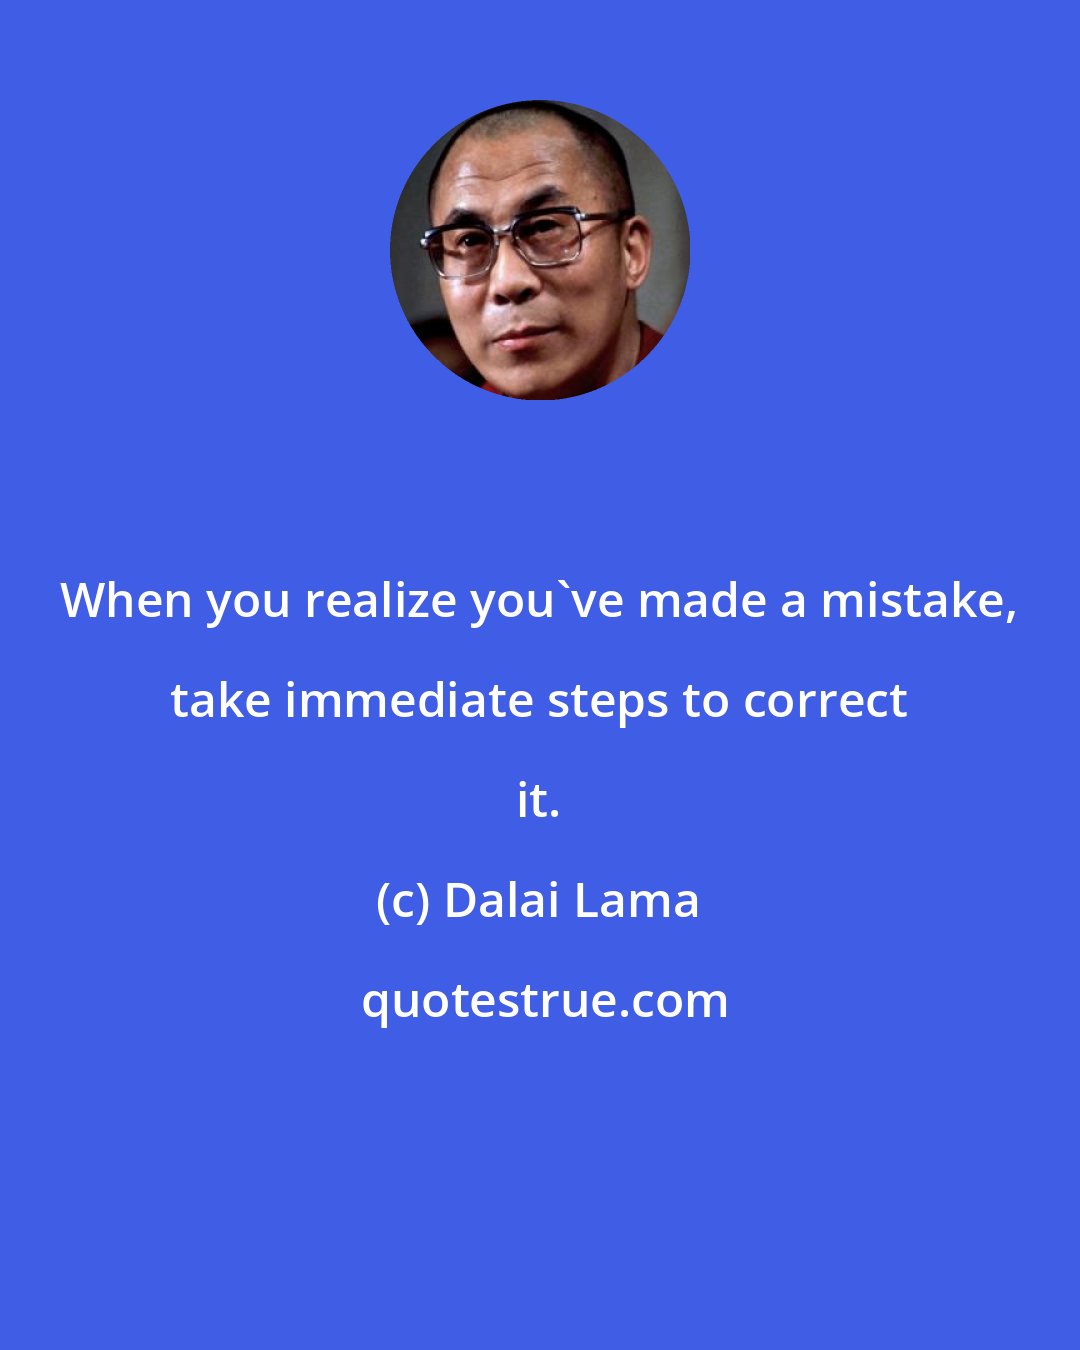 Dalai Lama: When you realize you've made a mistake, take immediate steps to correct it.